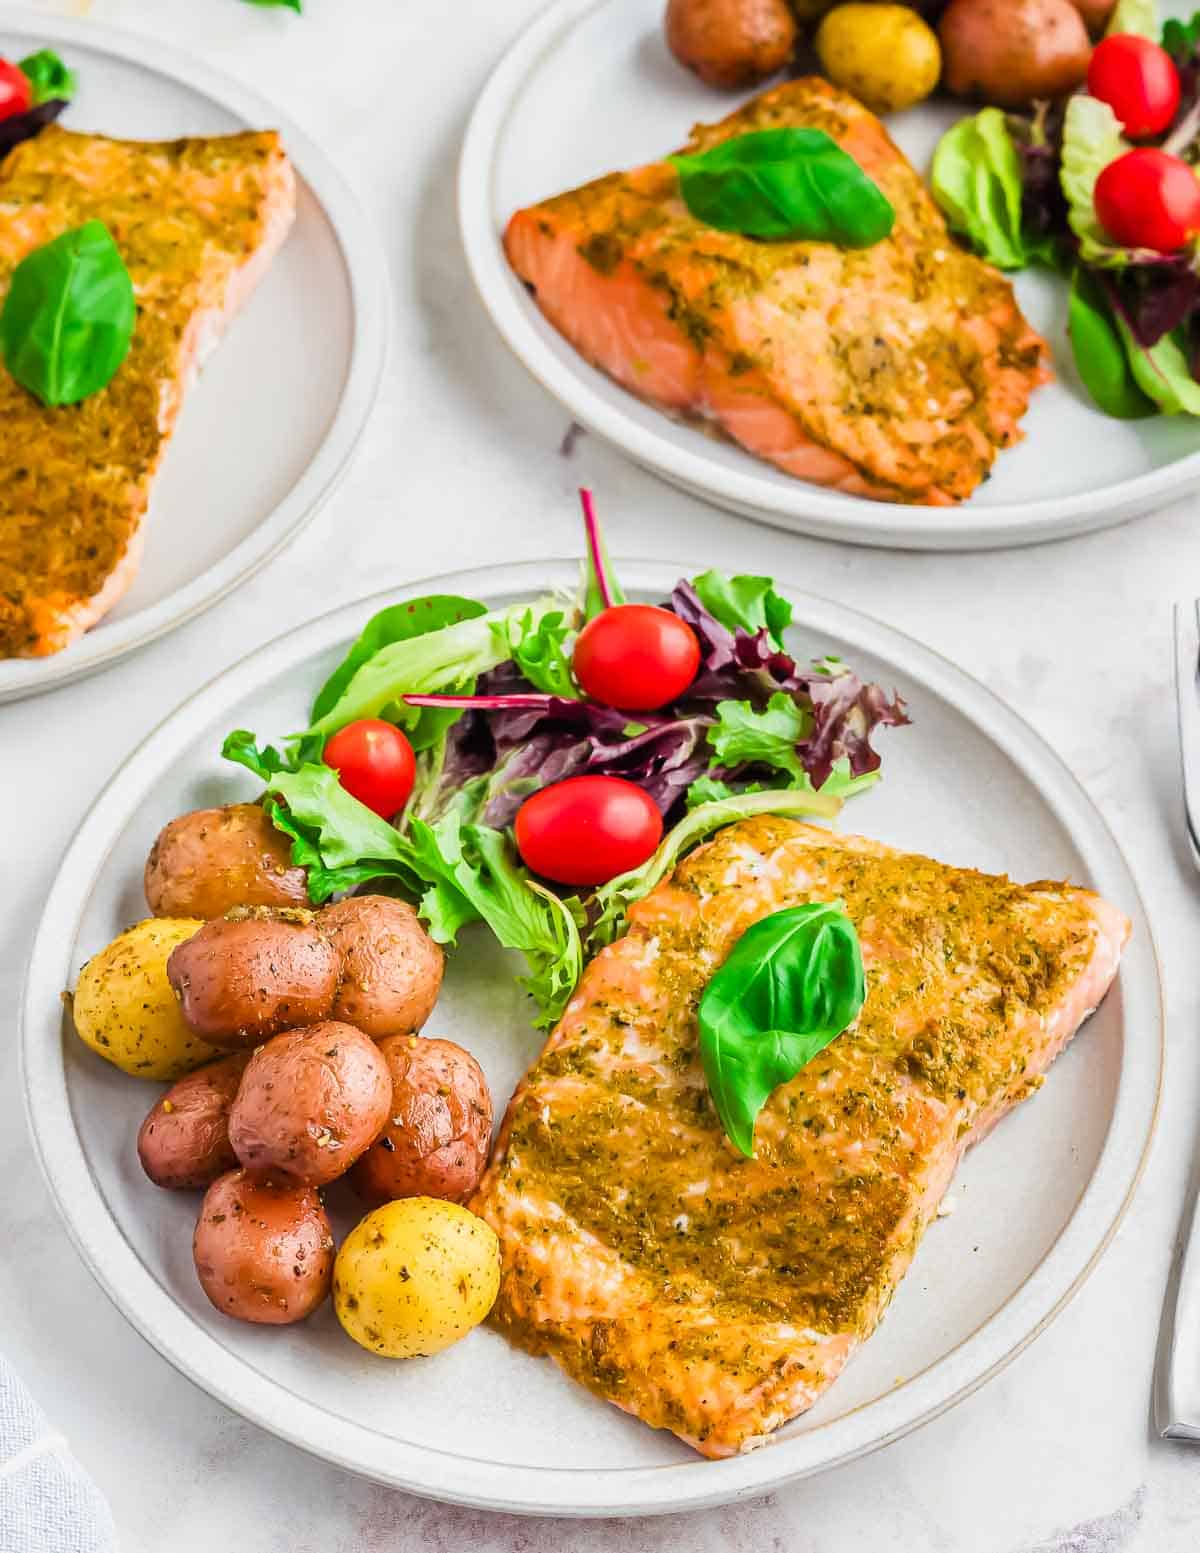 Pesto salmon on a plate with roasted potatoes and salad.